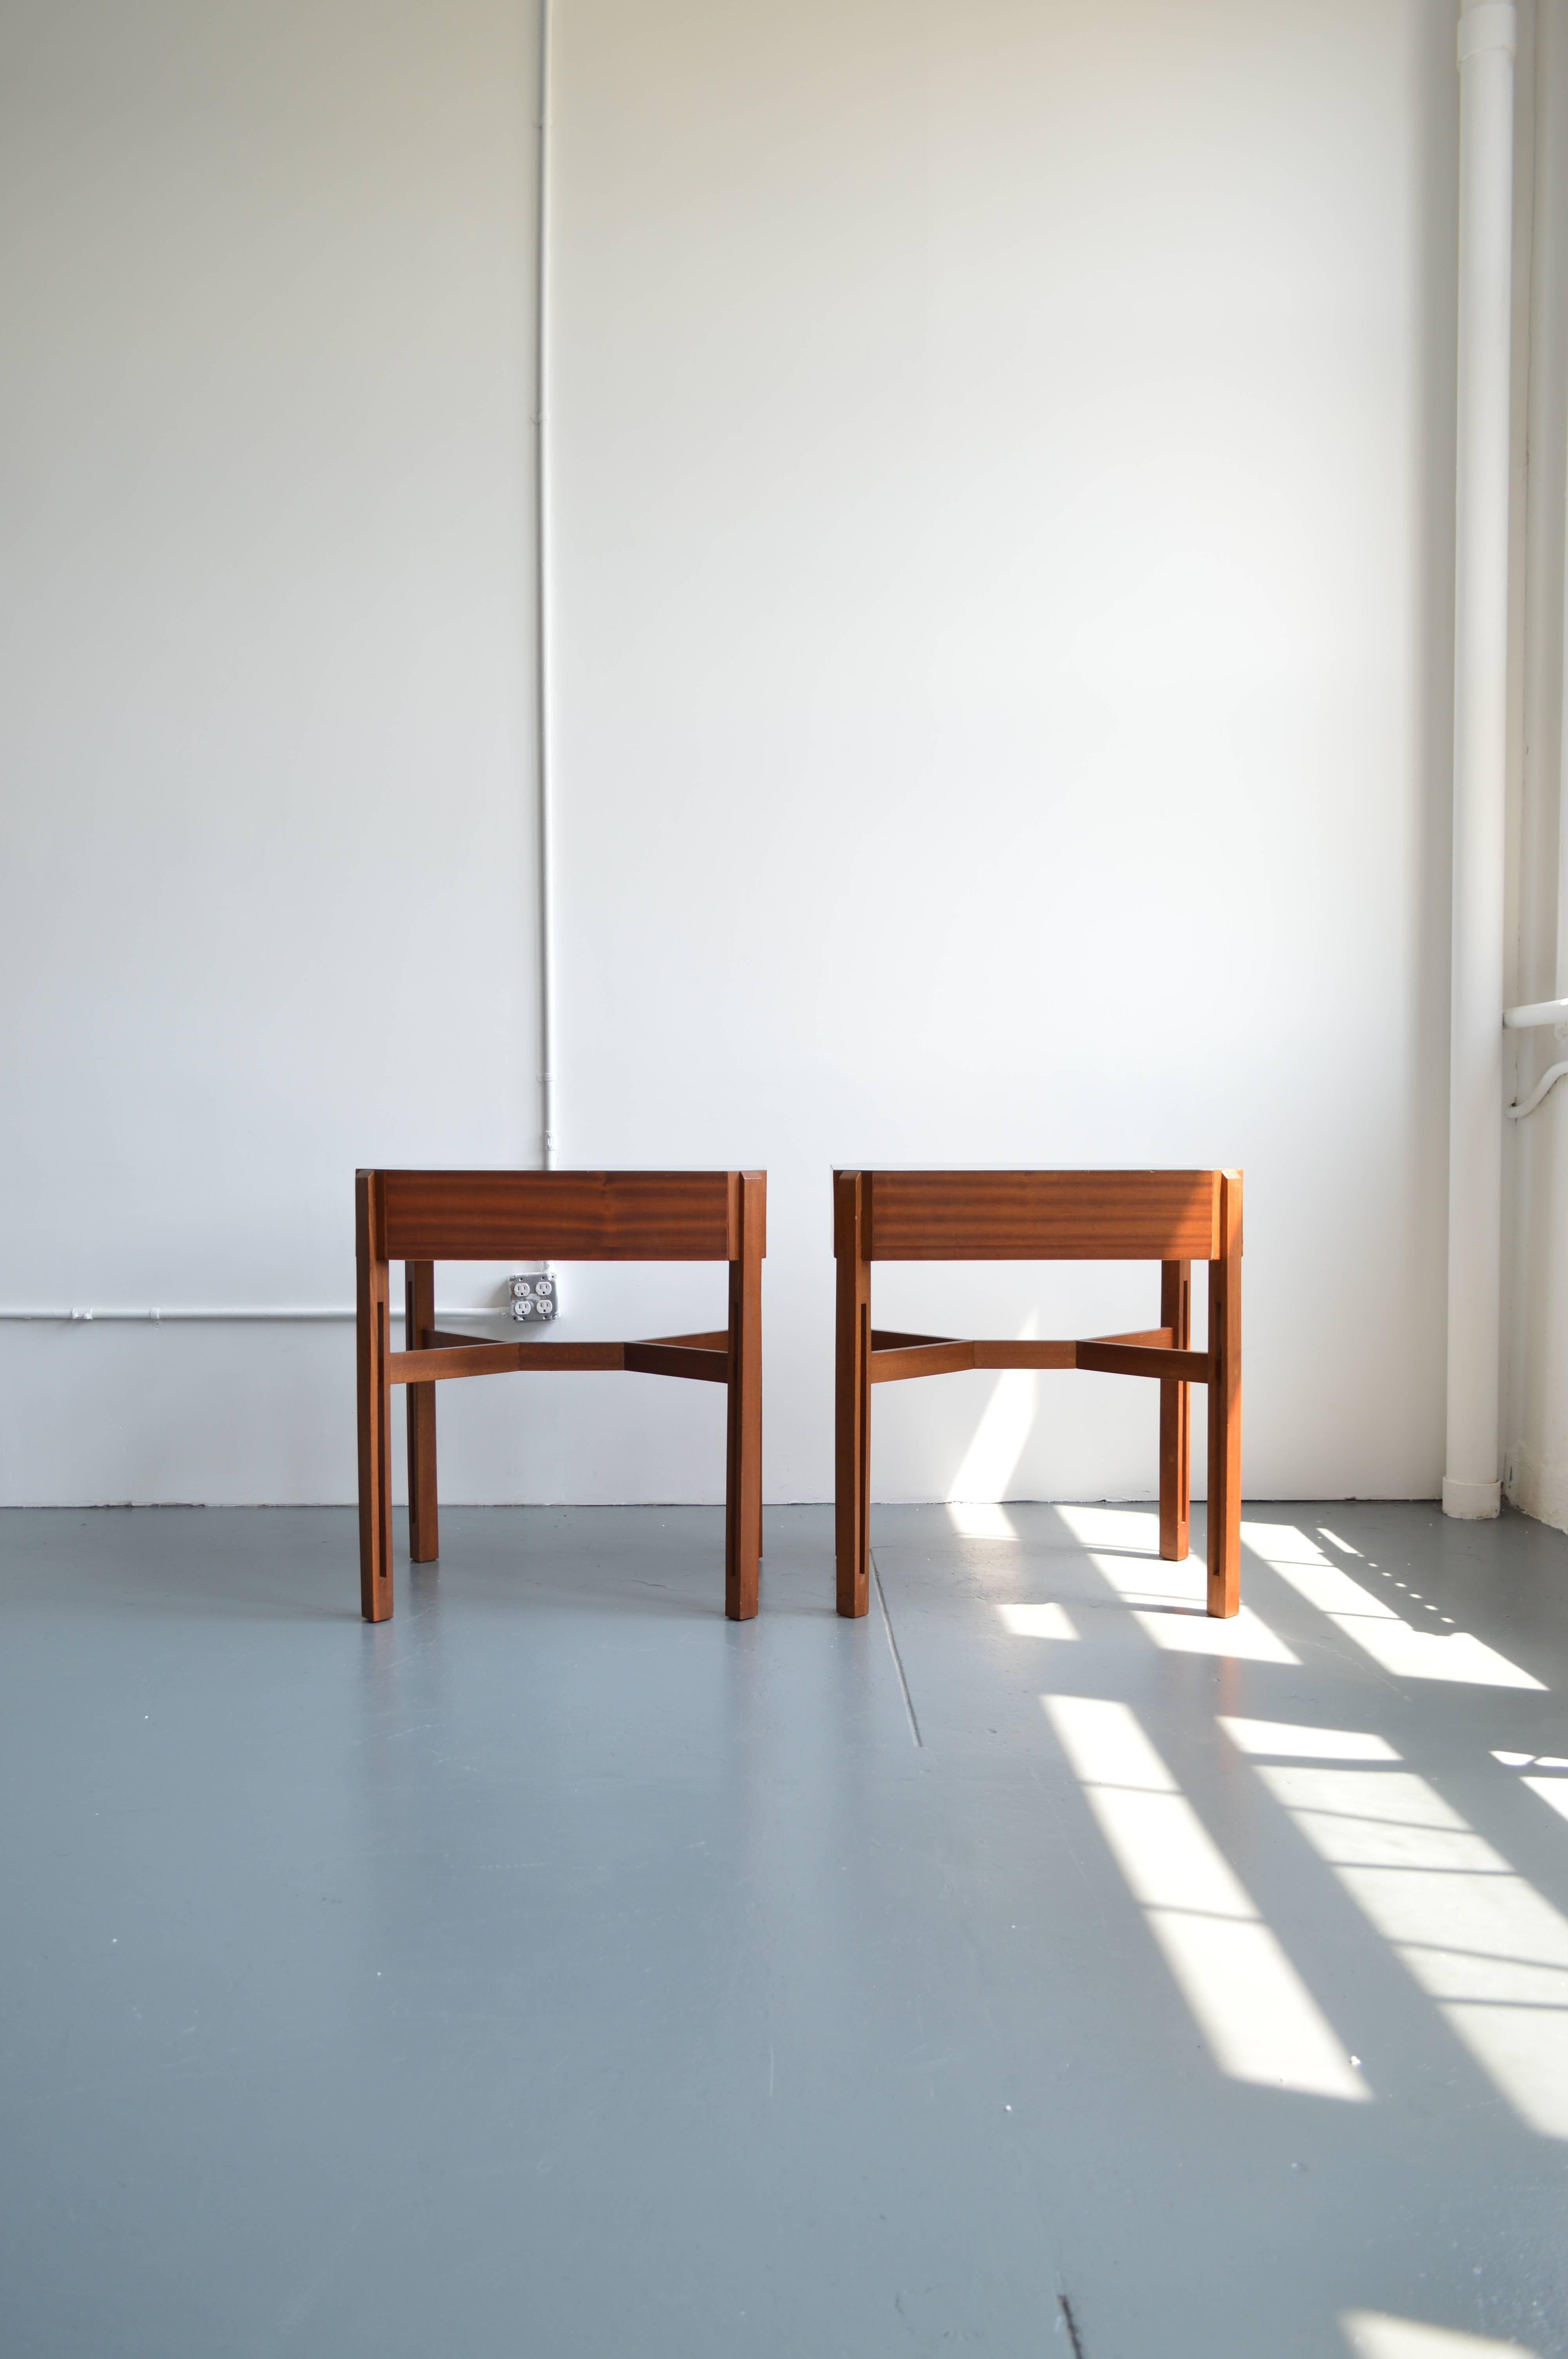 Pair of mahogany nightstands by Ico and Luisa Parisi for Bernini. Originally from the Hotel Lorena in Grosseto, Italy.